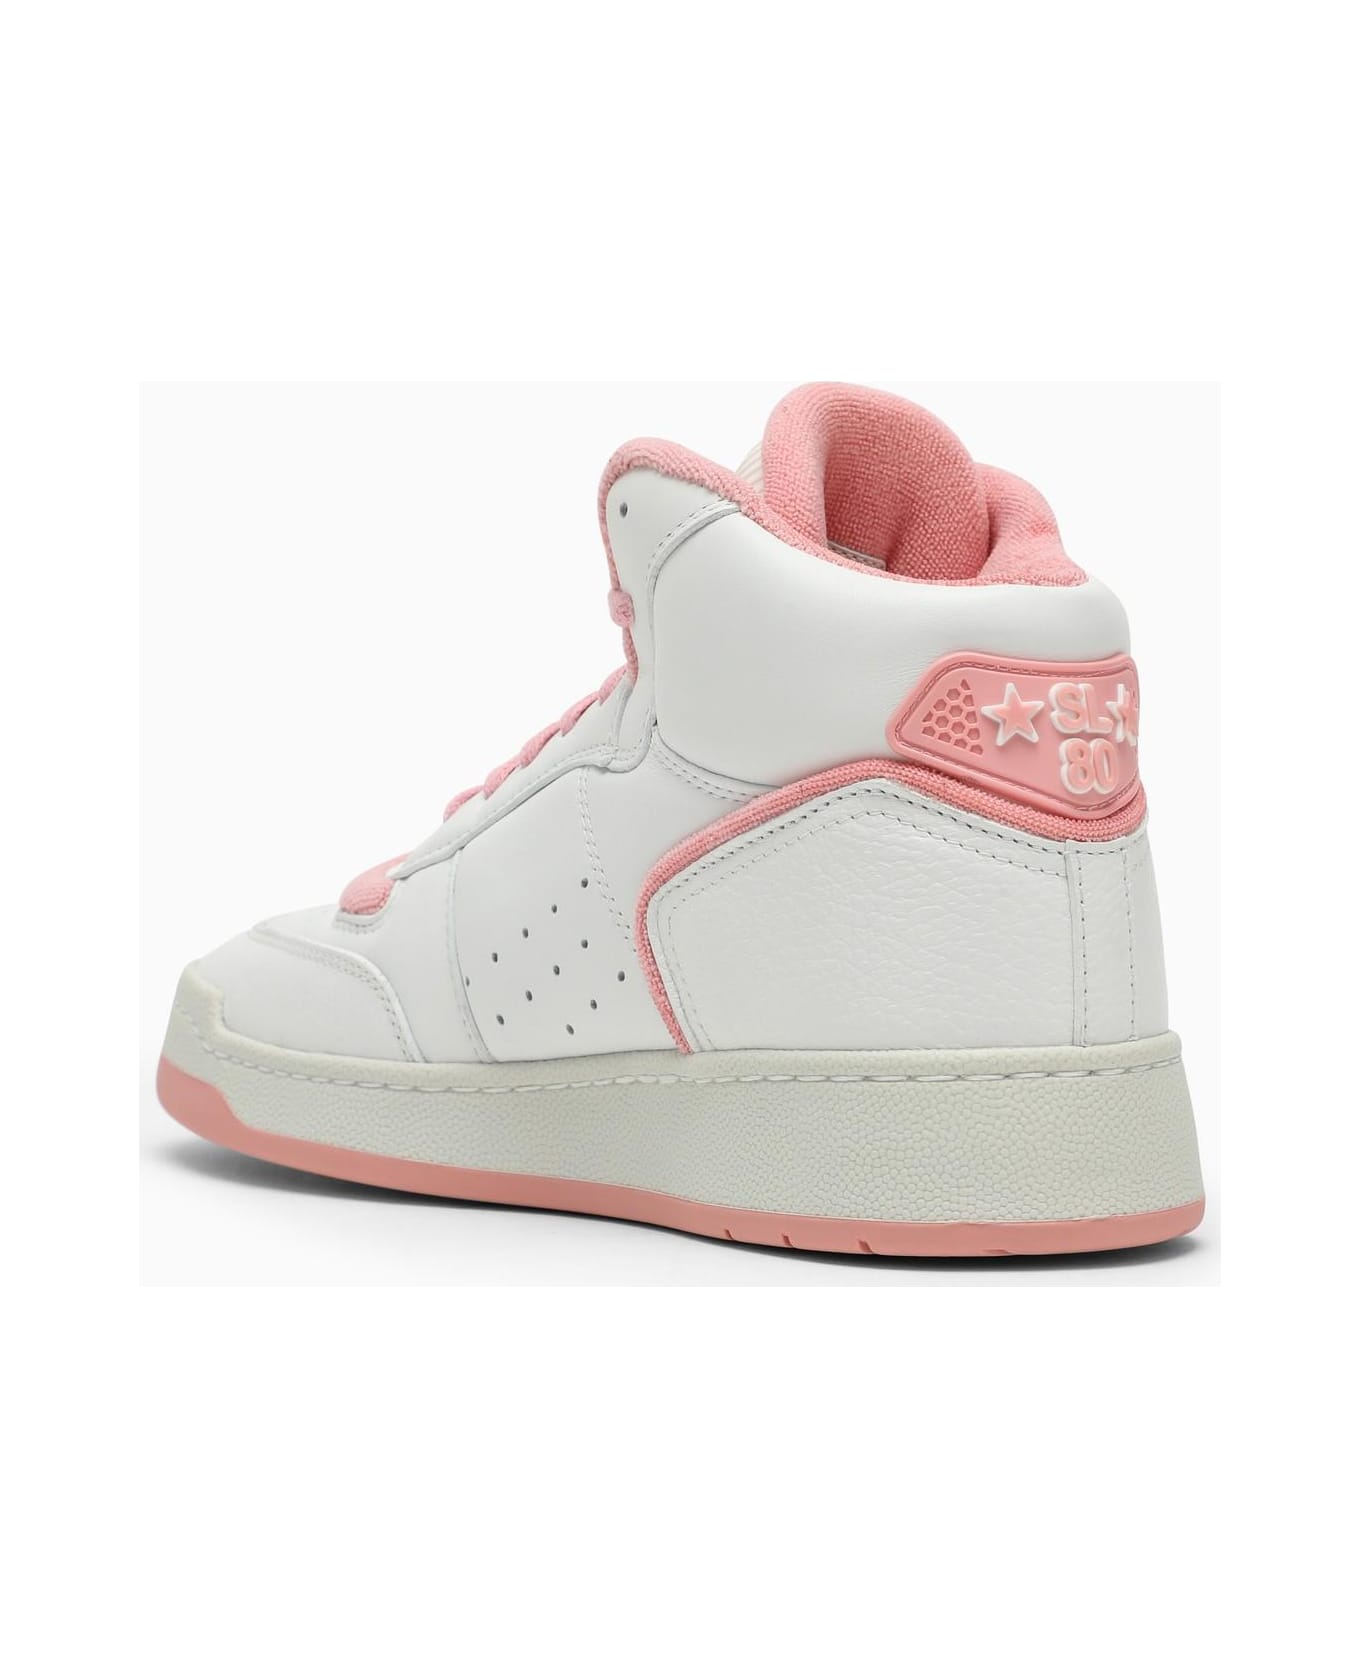 Saint Laurent Sl\/80 White\/pink Leather Sneakers - WHITE